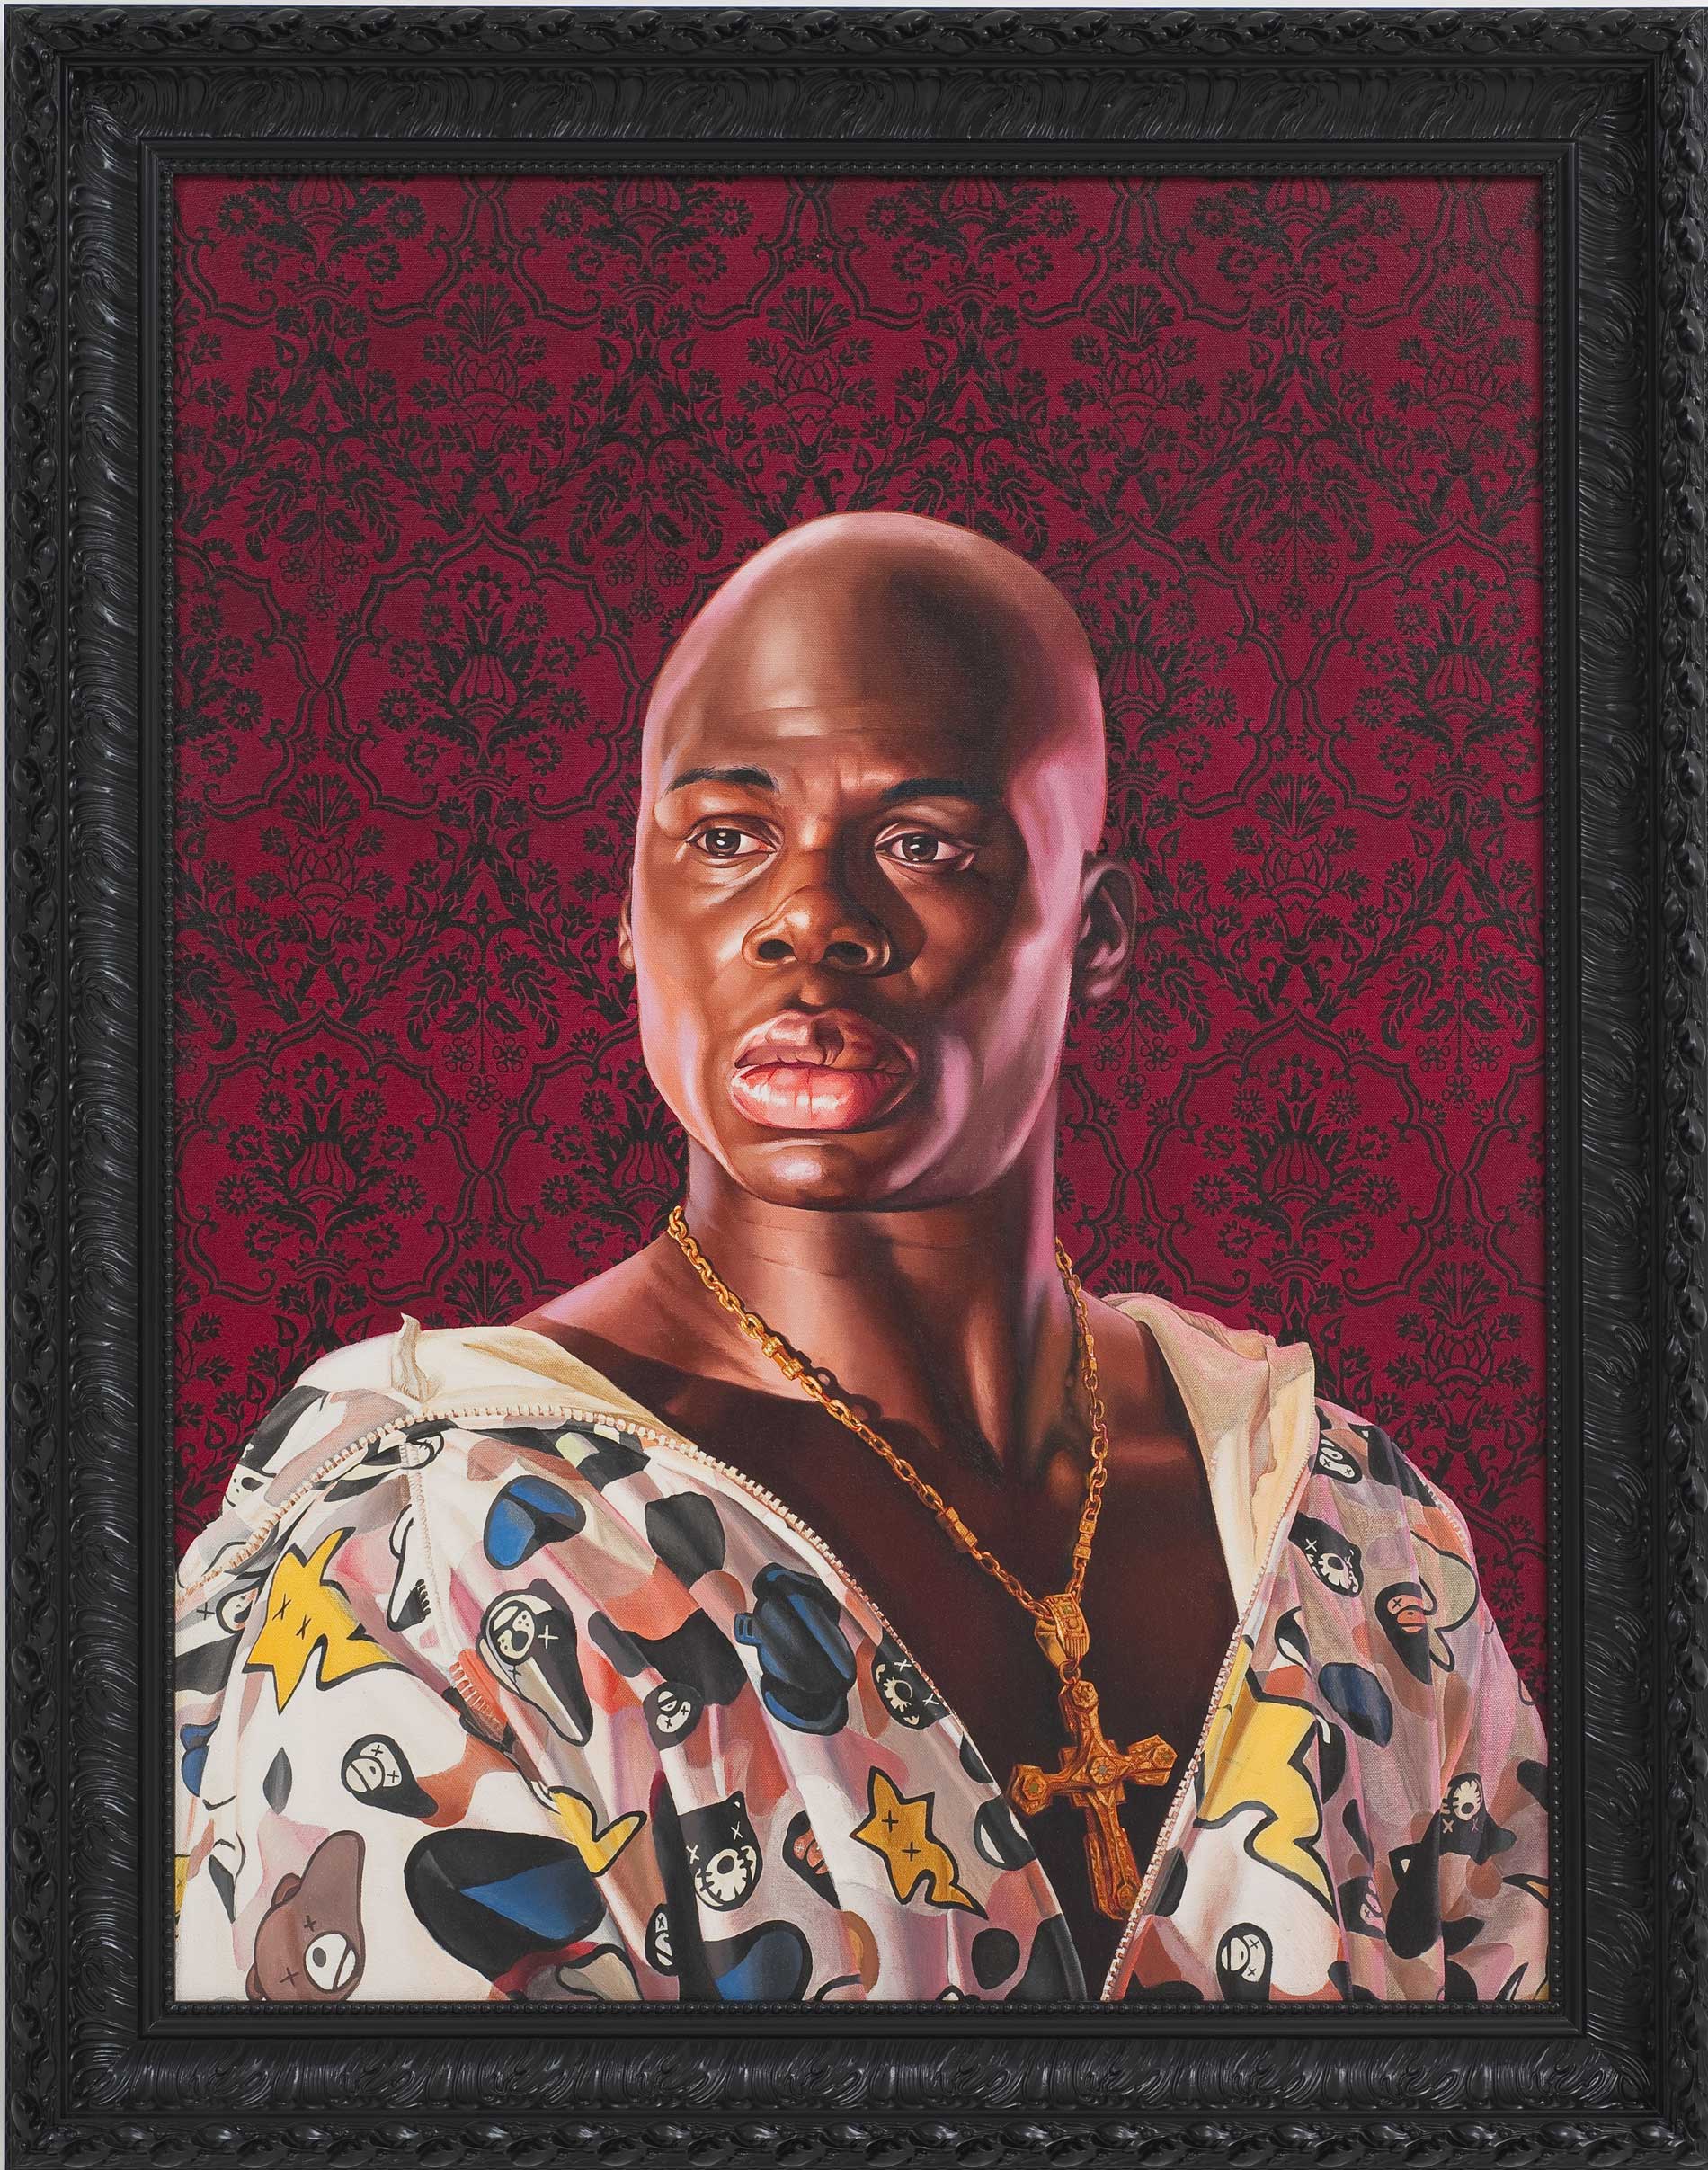 Kehinde Wiley | Selected Works: 2009 | Portrait of Bust Cardinal Richelieu, 2009 Oil on Canvas.  | 8